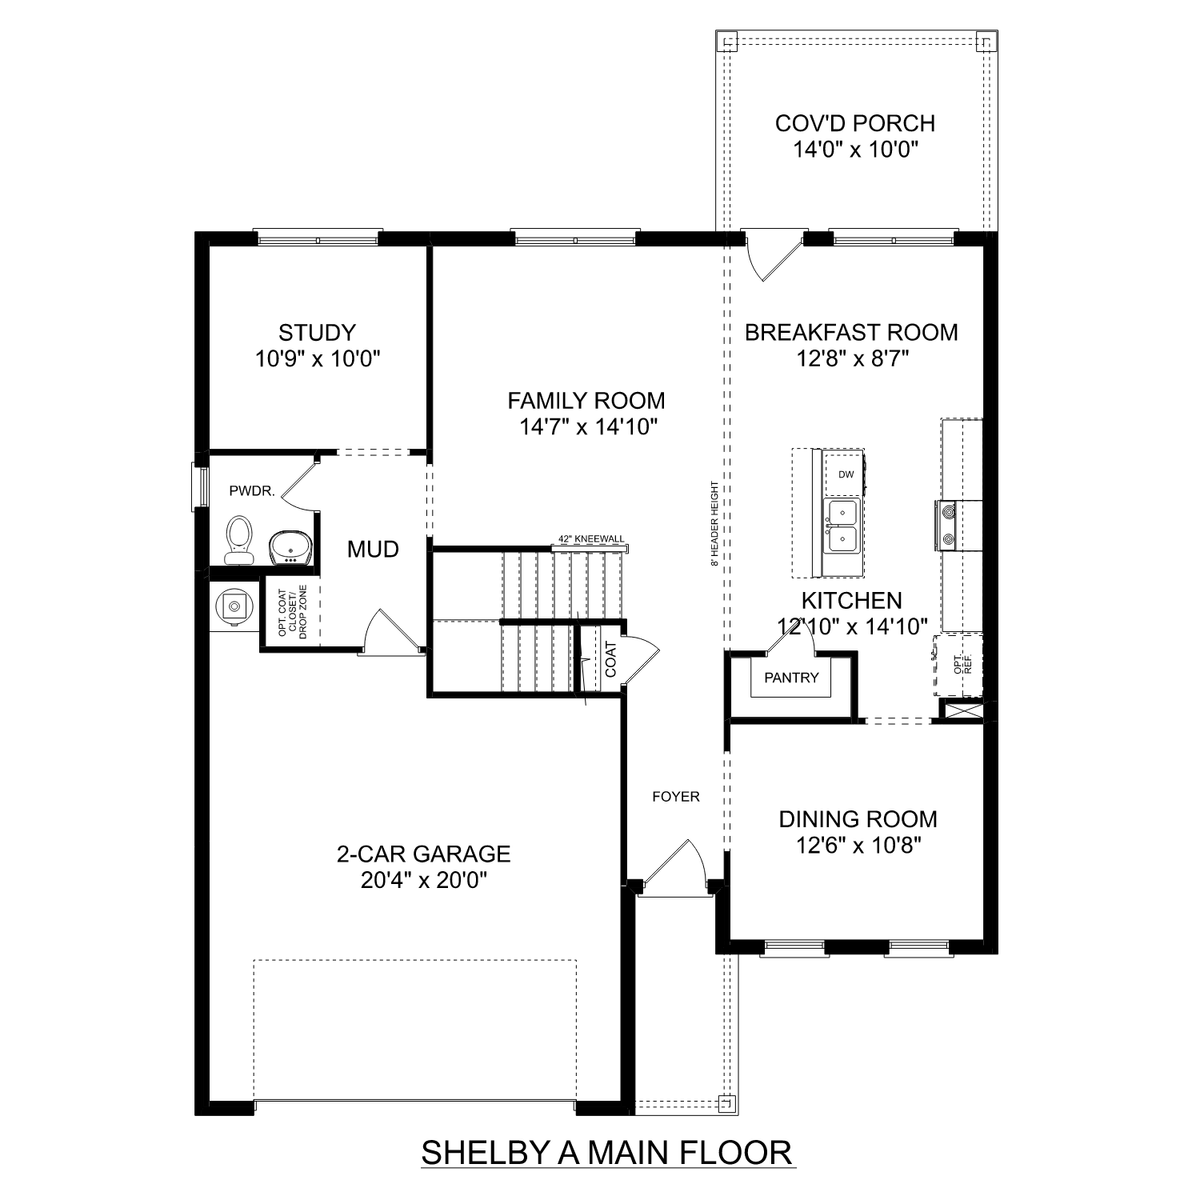 1 - The Shelby A buildable floor plan layout in Davidson Homes' Creek Grove community.